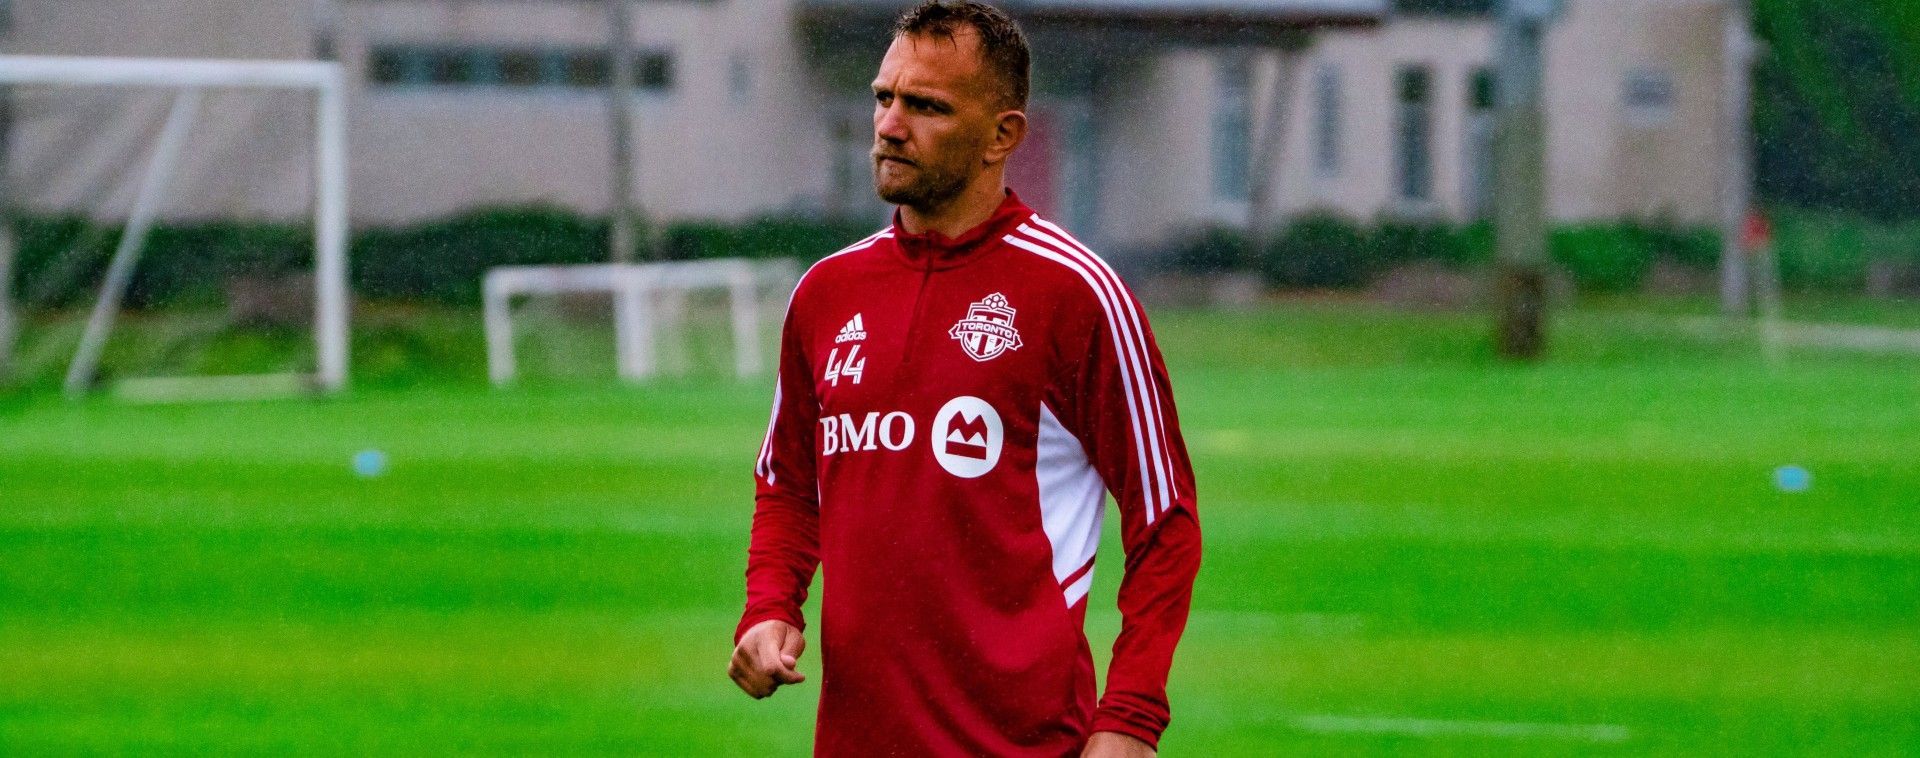 Toronto FC transfer confirmed by Brondby IF